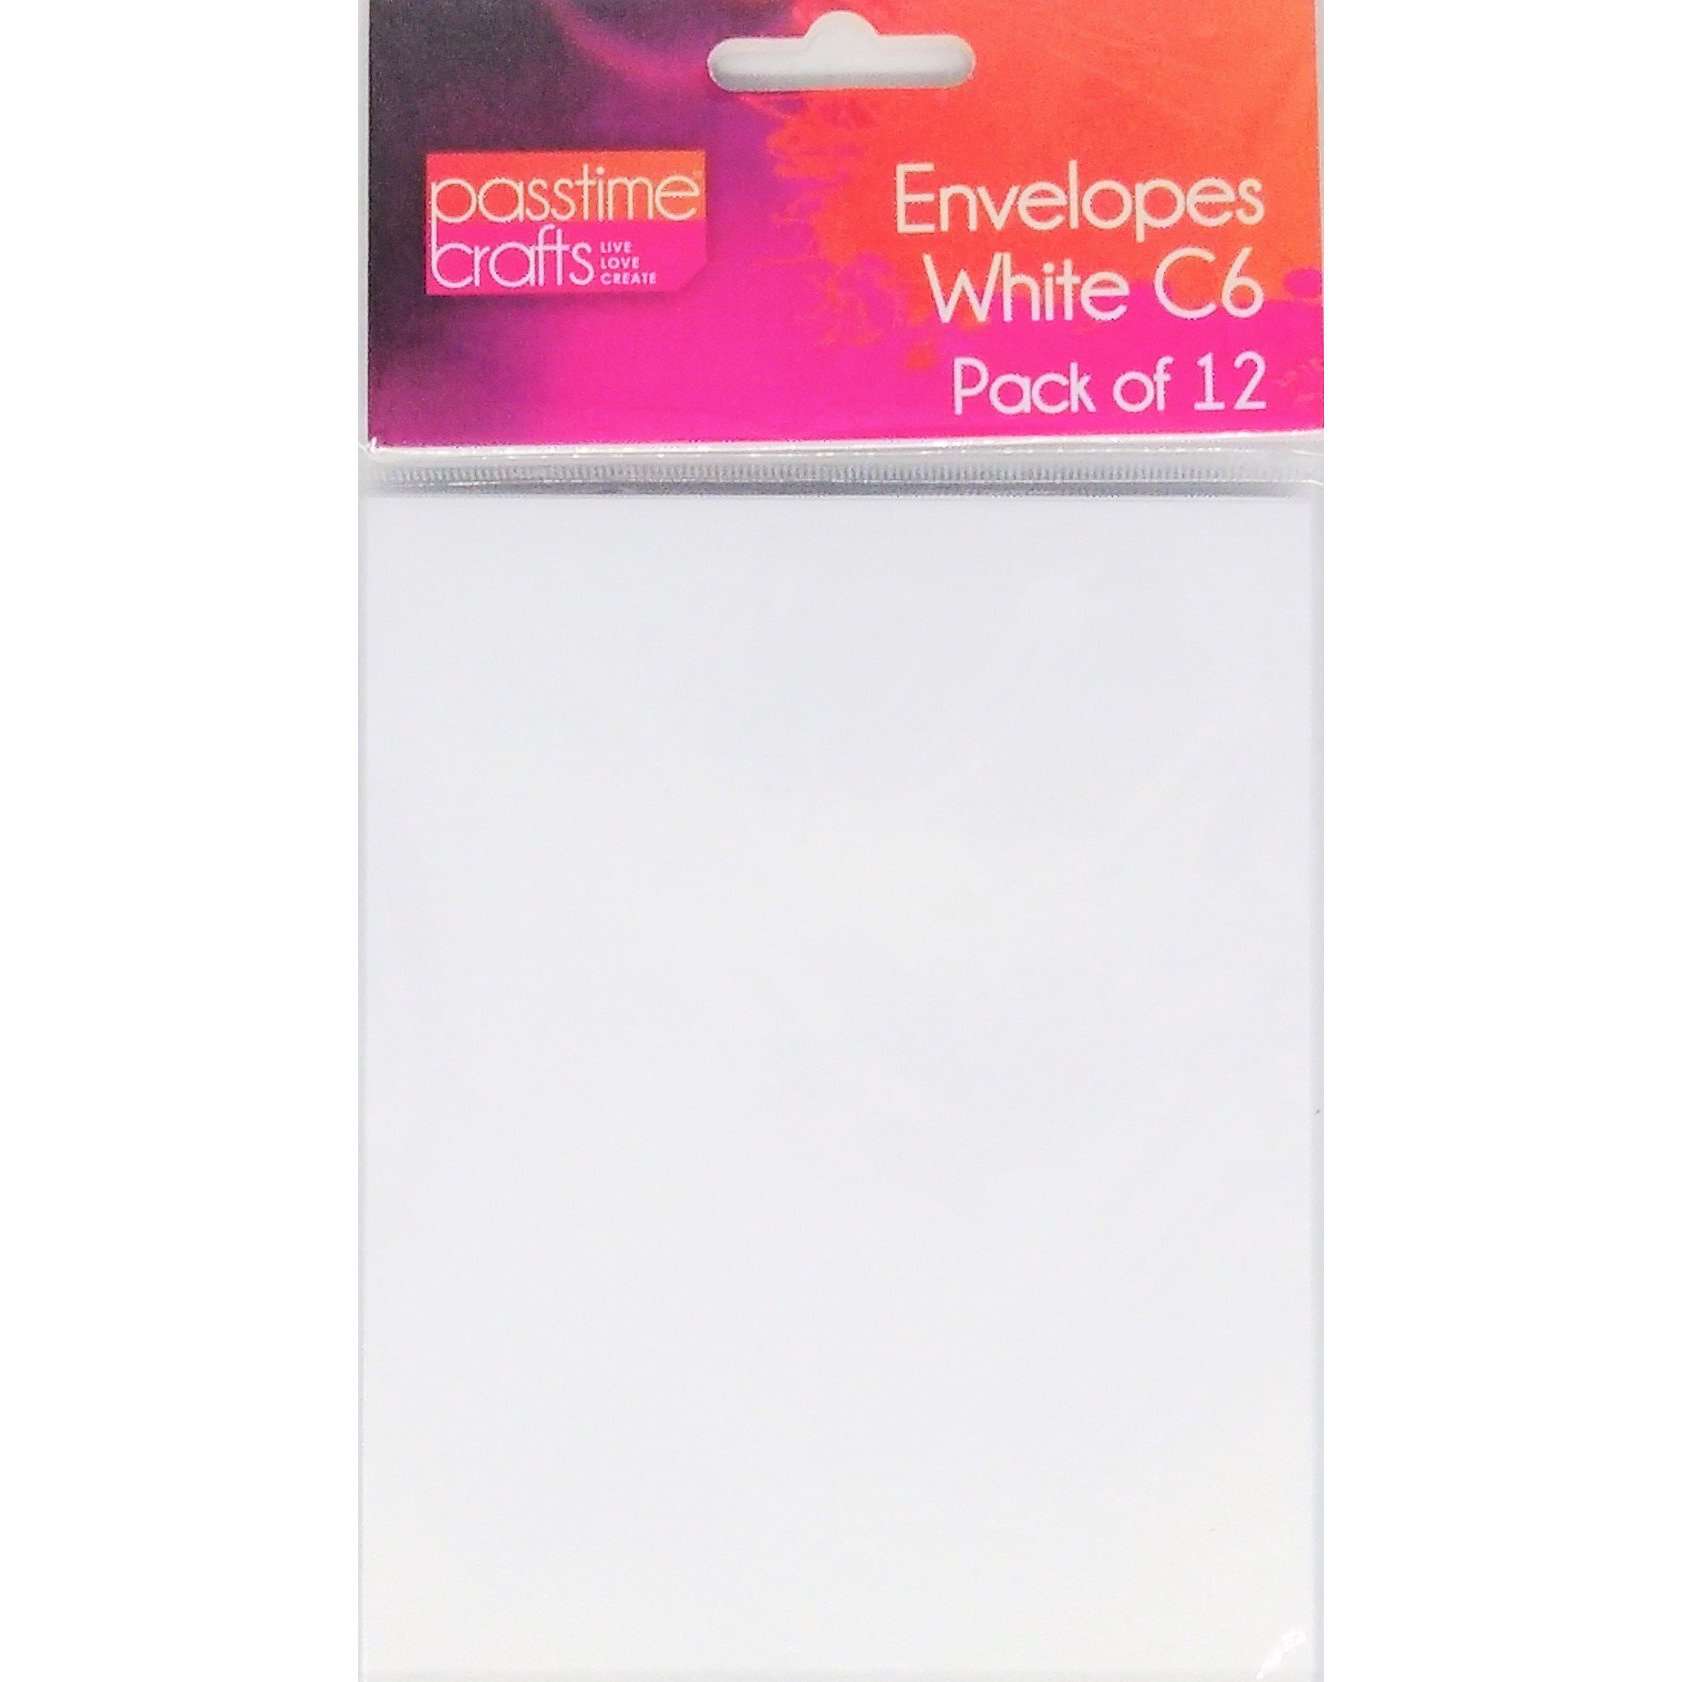 Buy onilne Mont Marte C6 White Envelopes 12 Pack | Dollars and Sense cheap and low prices in australia